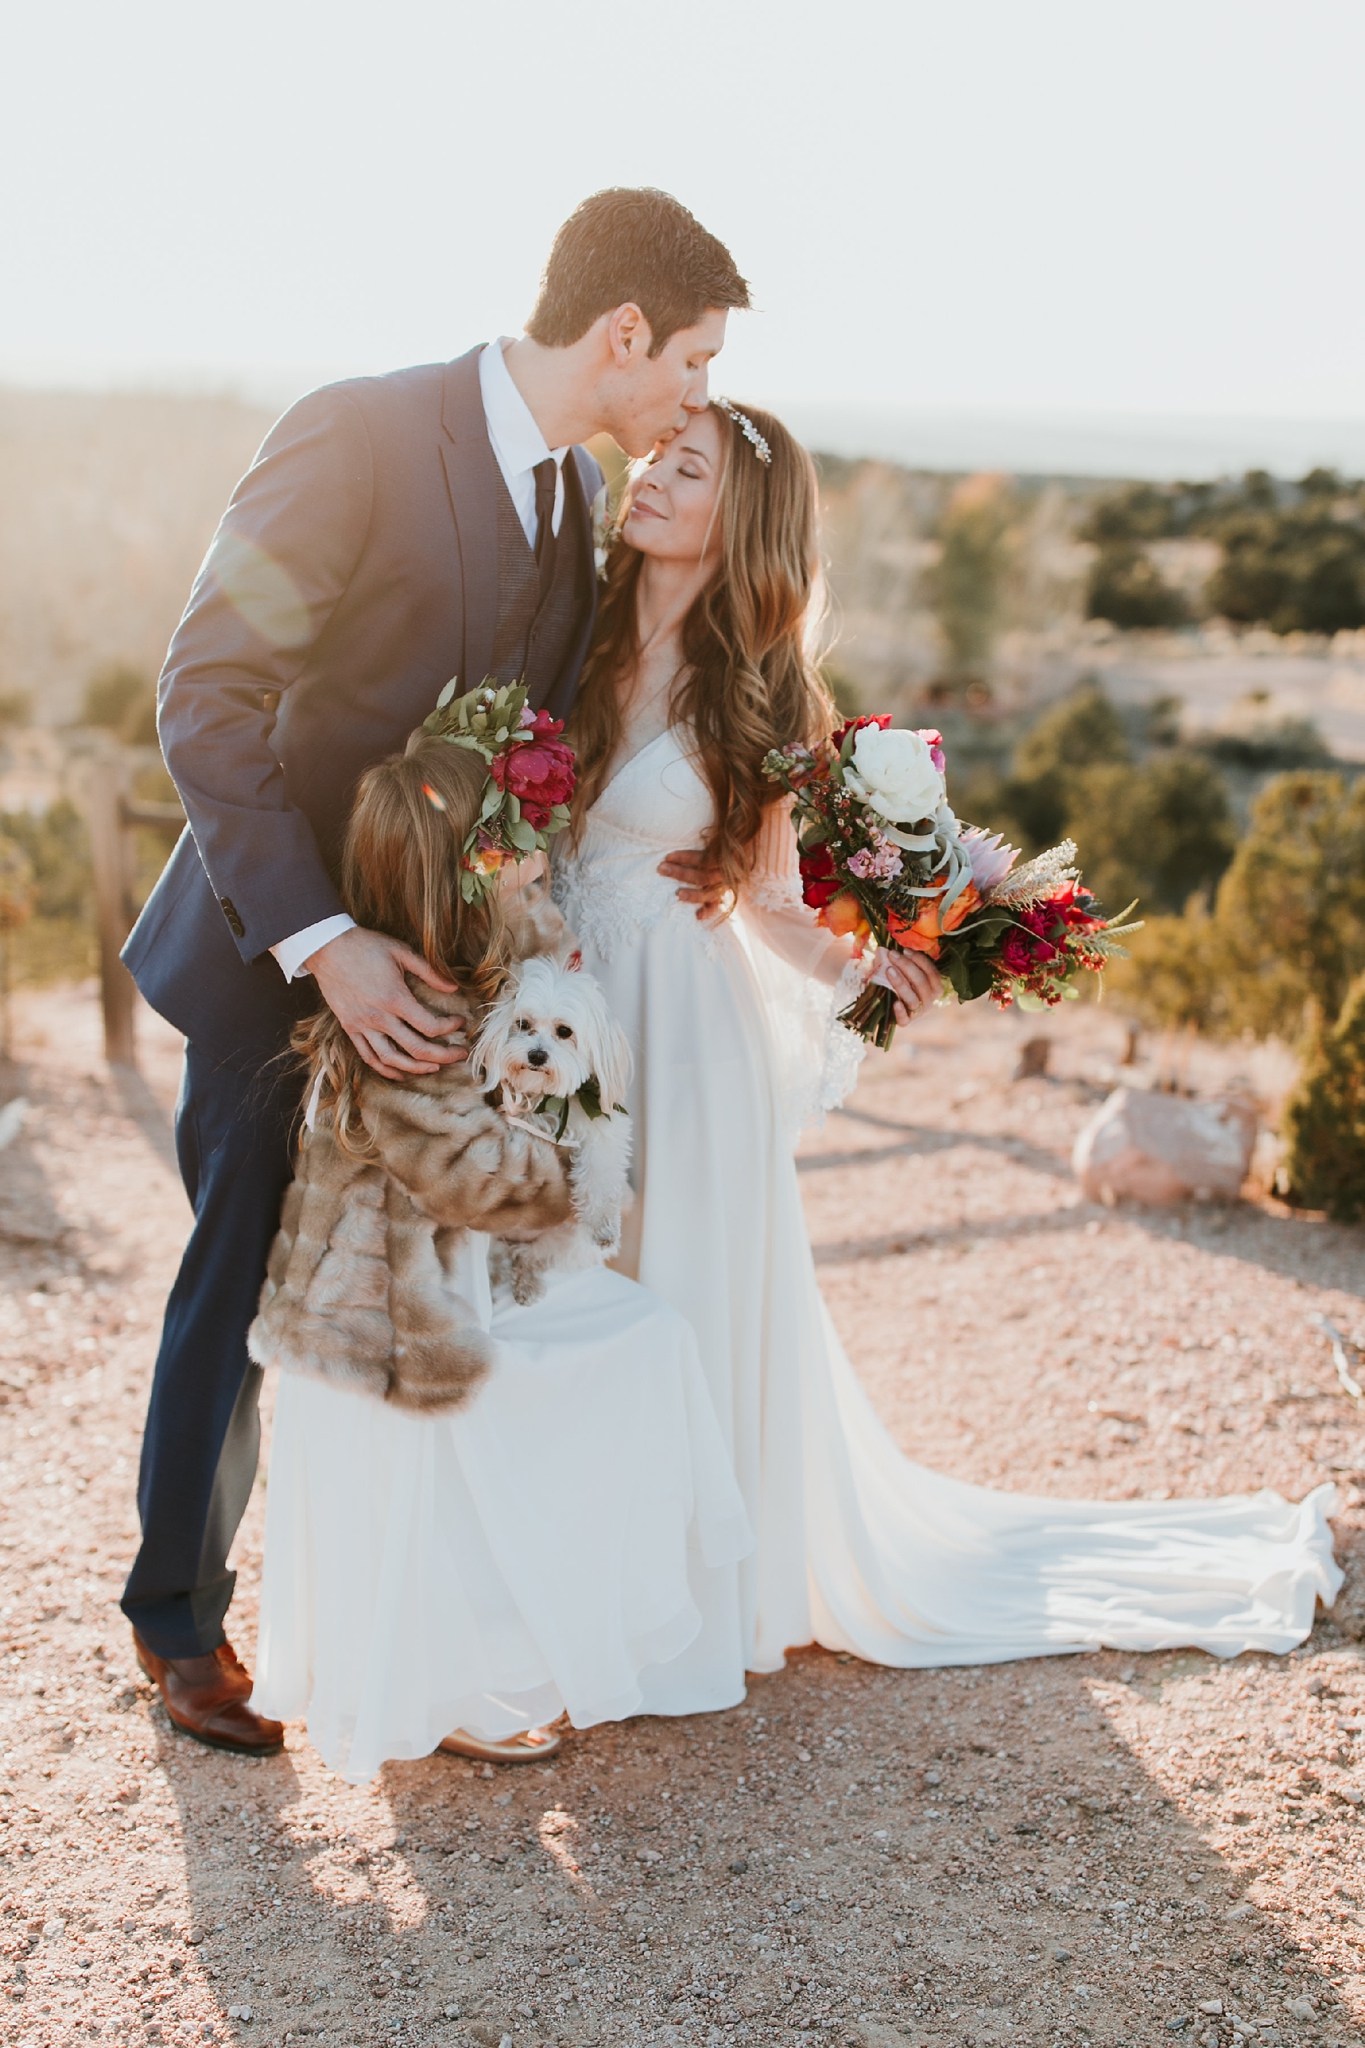 Alicia+lucia+photography+-+albuquerque+wedding+photographer+-+santa+fe+wedding+photography+-+new+mexico+wedding+photographer+-+new+mexico+wedding+-+wedding+gowns+-+bridal+gowns+-+a+line+wedding+gown_0042.jpg